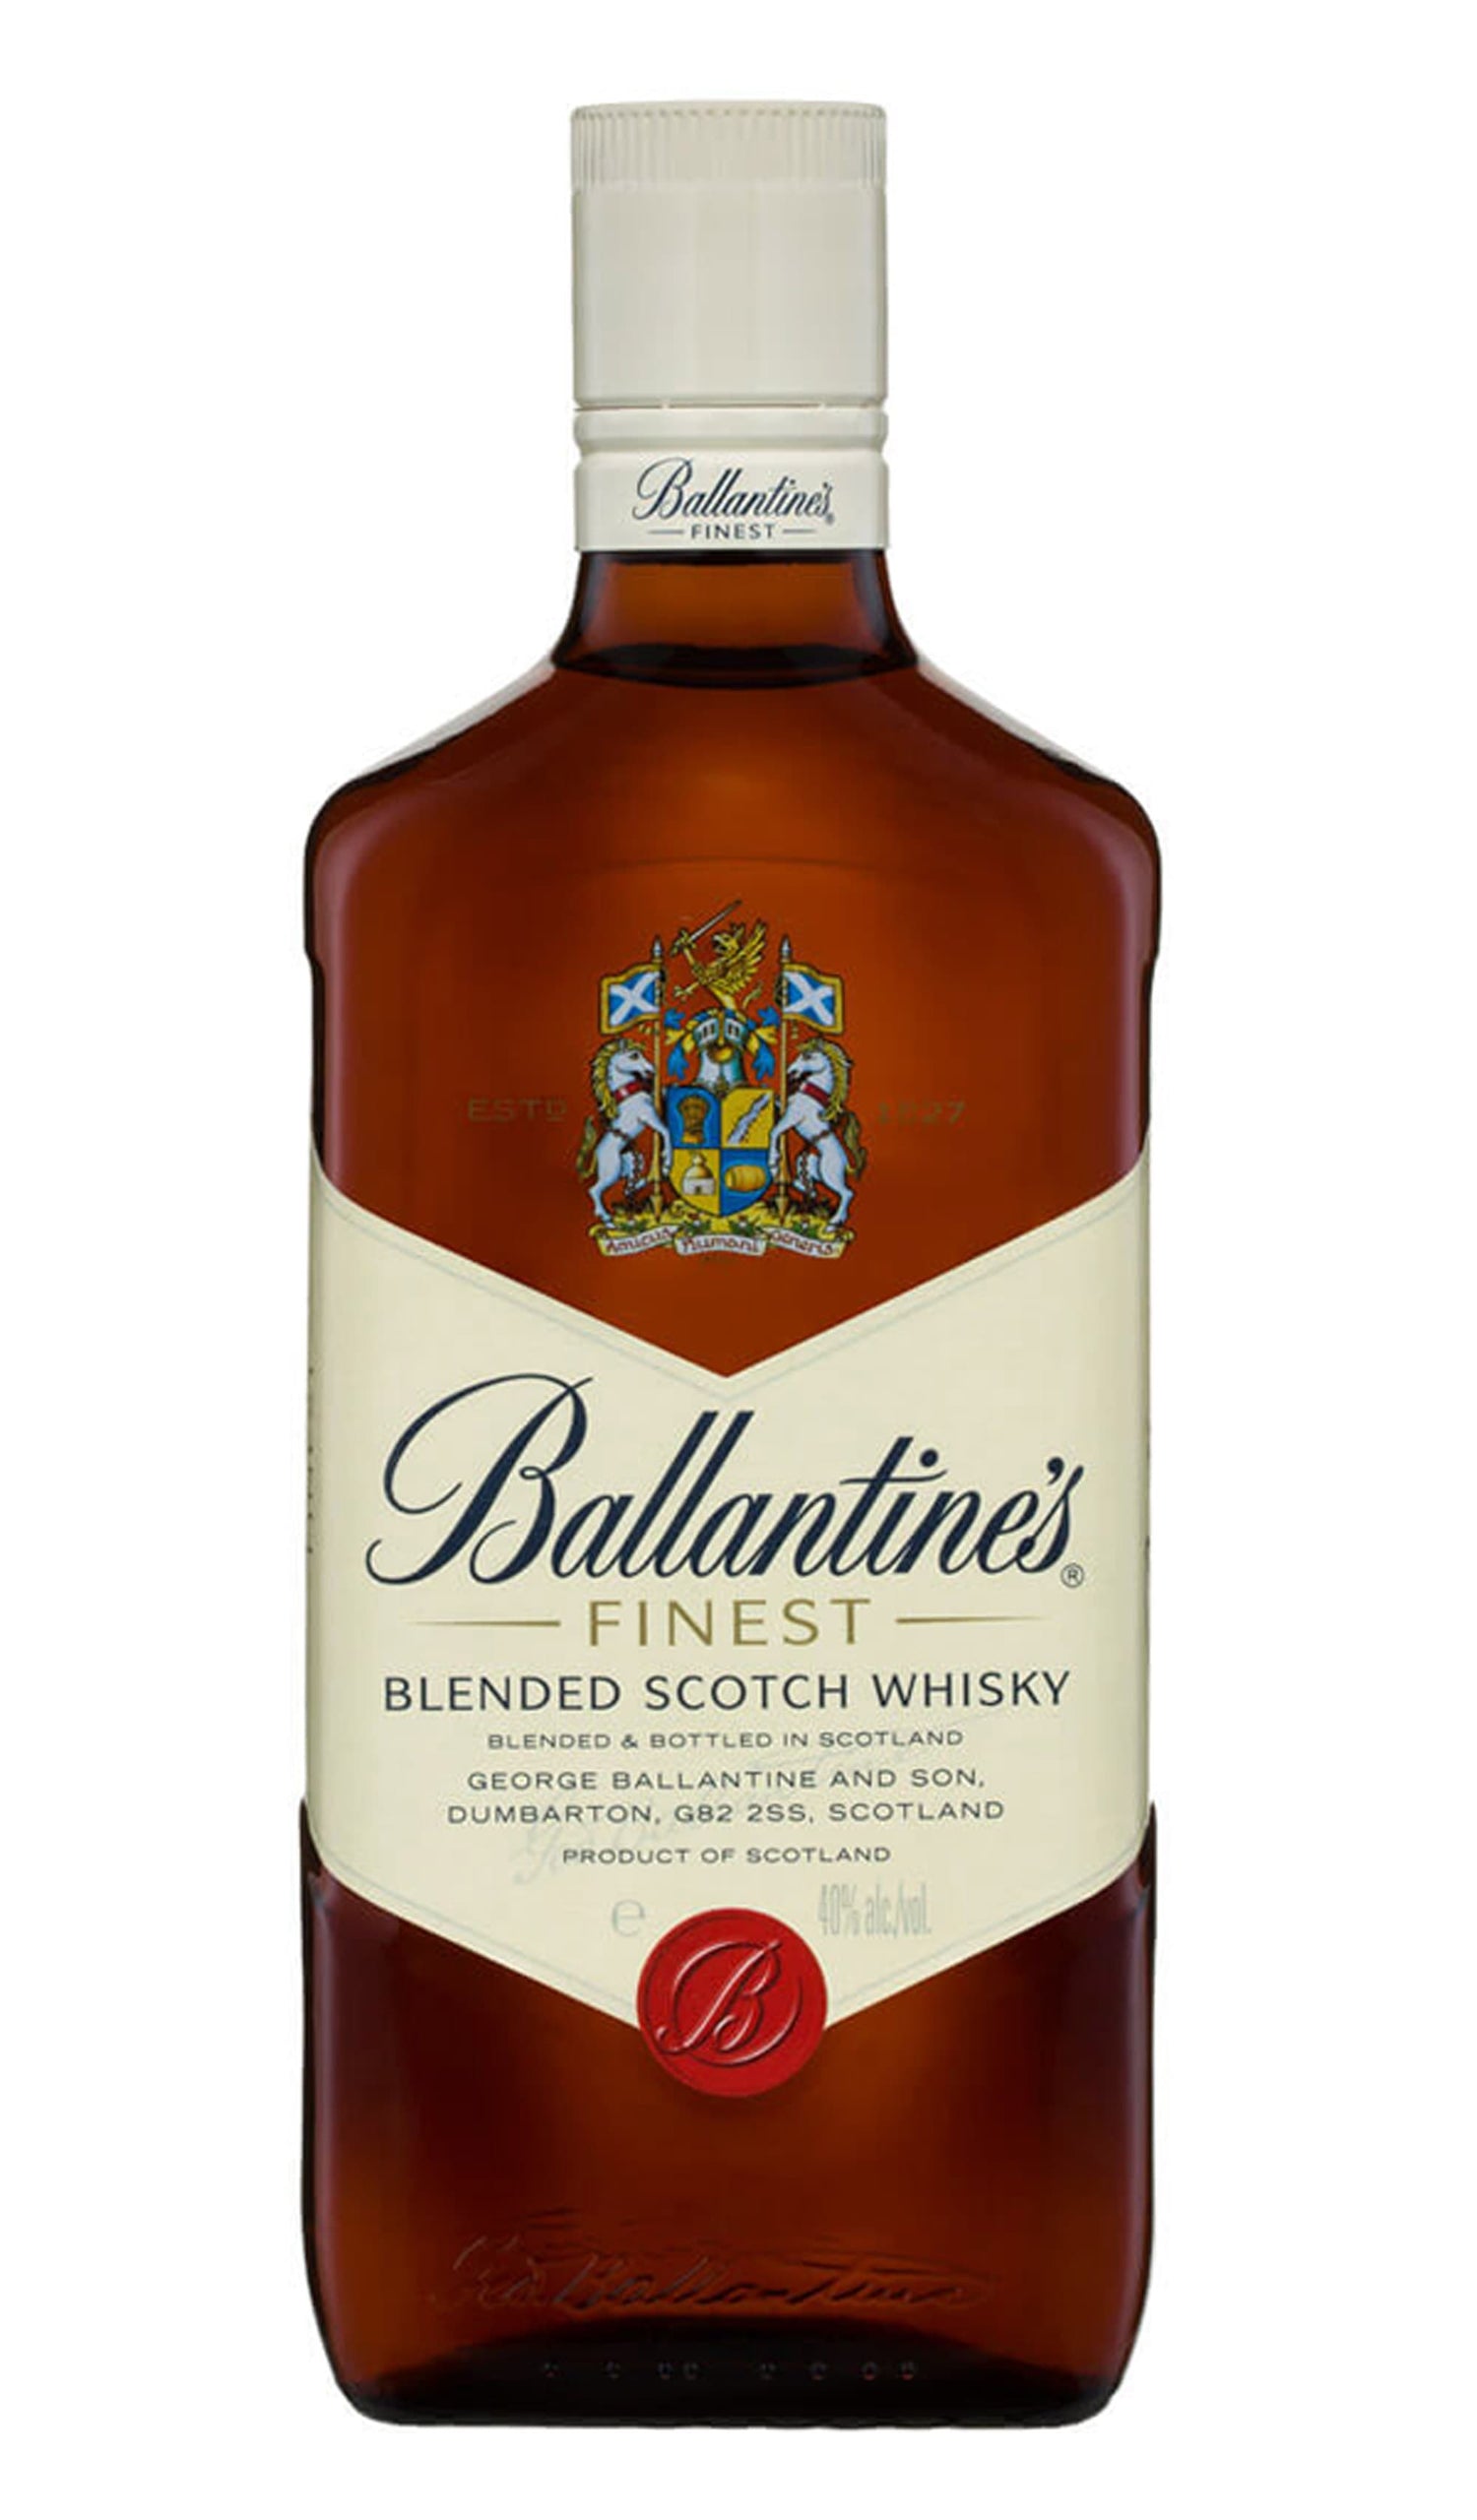 Find out more or buy Ballantine's Finest Blended Scotch Whisky 700mL online at Wine Sellers Direct - Australia’s independent liquor specialists.